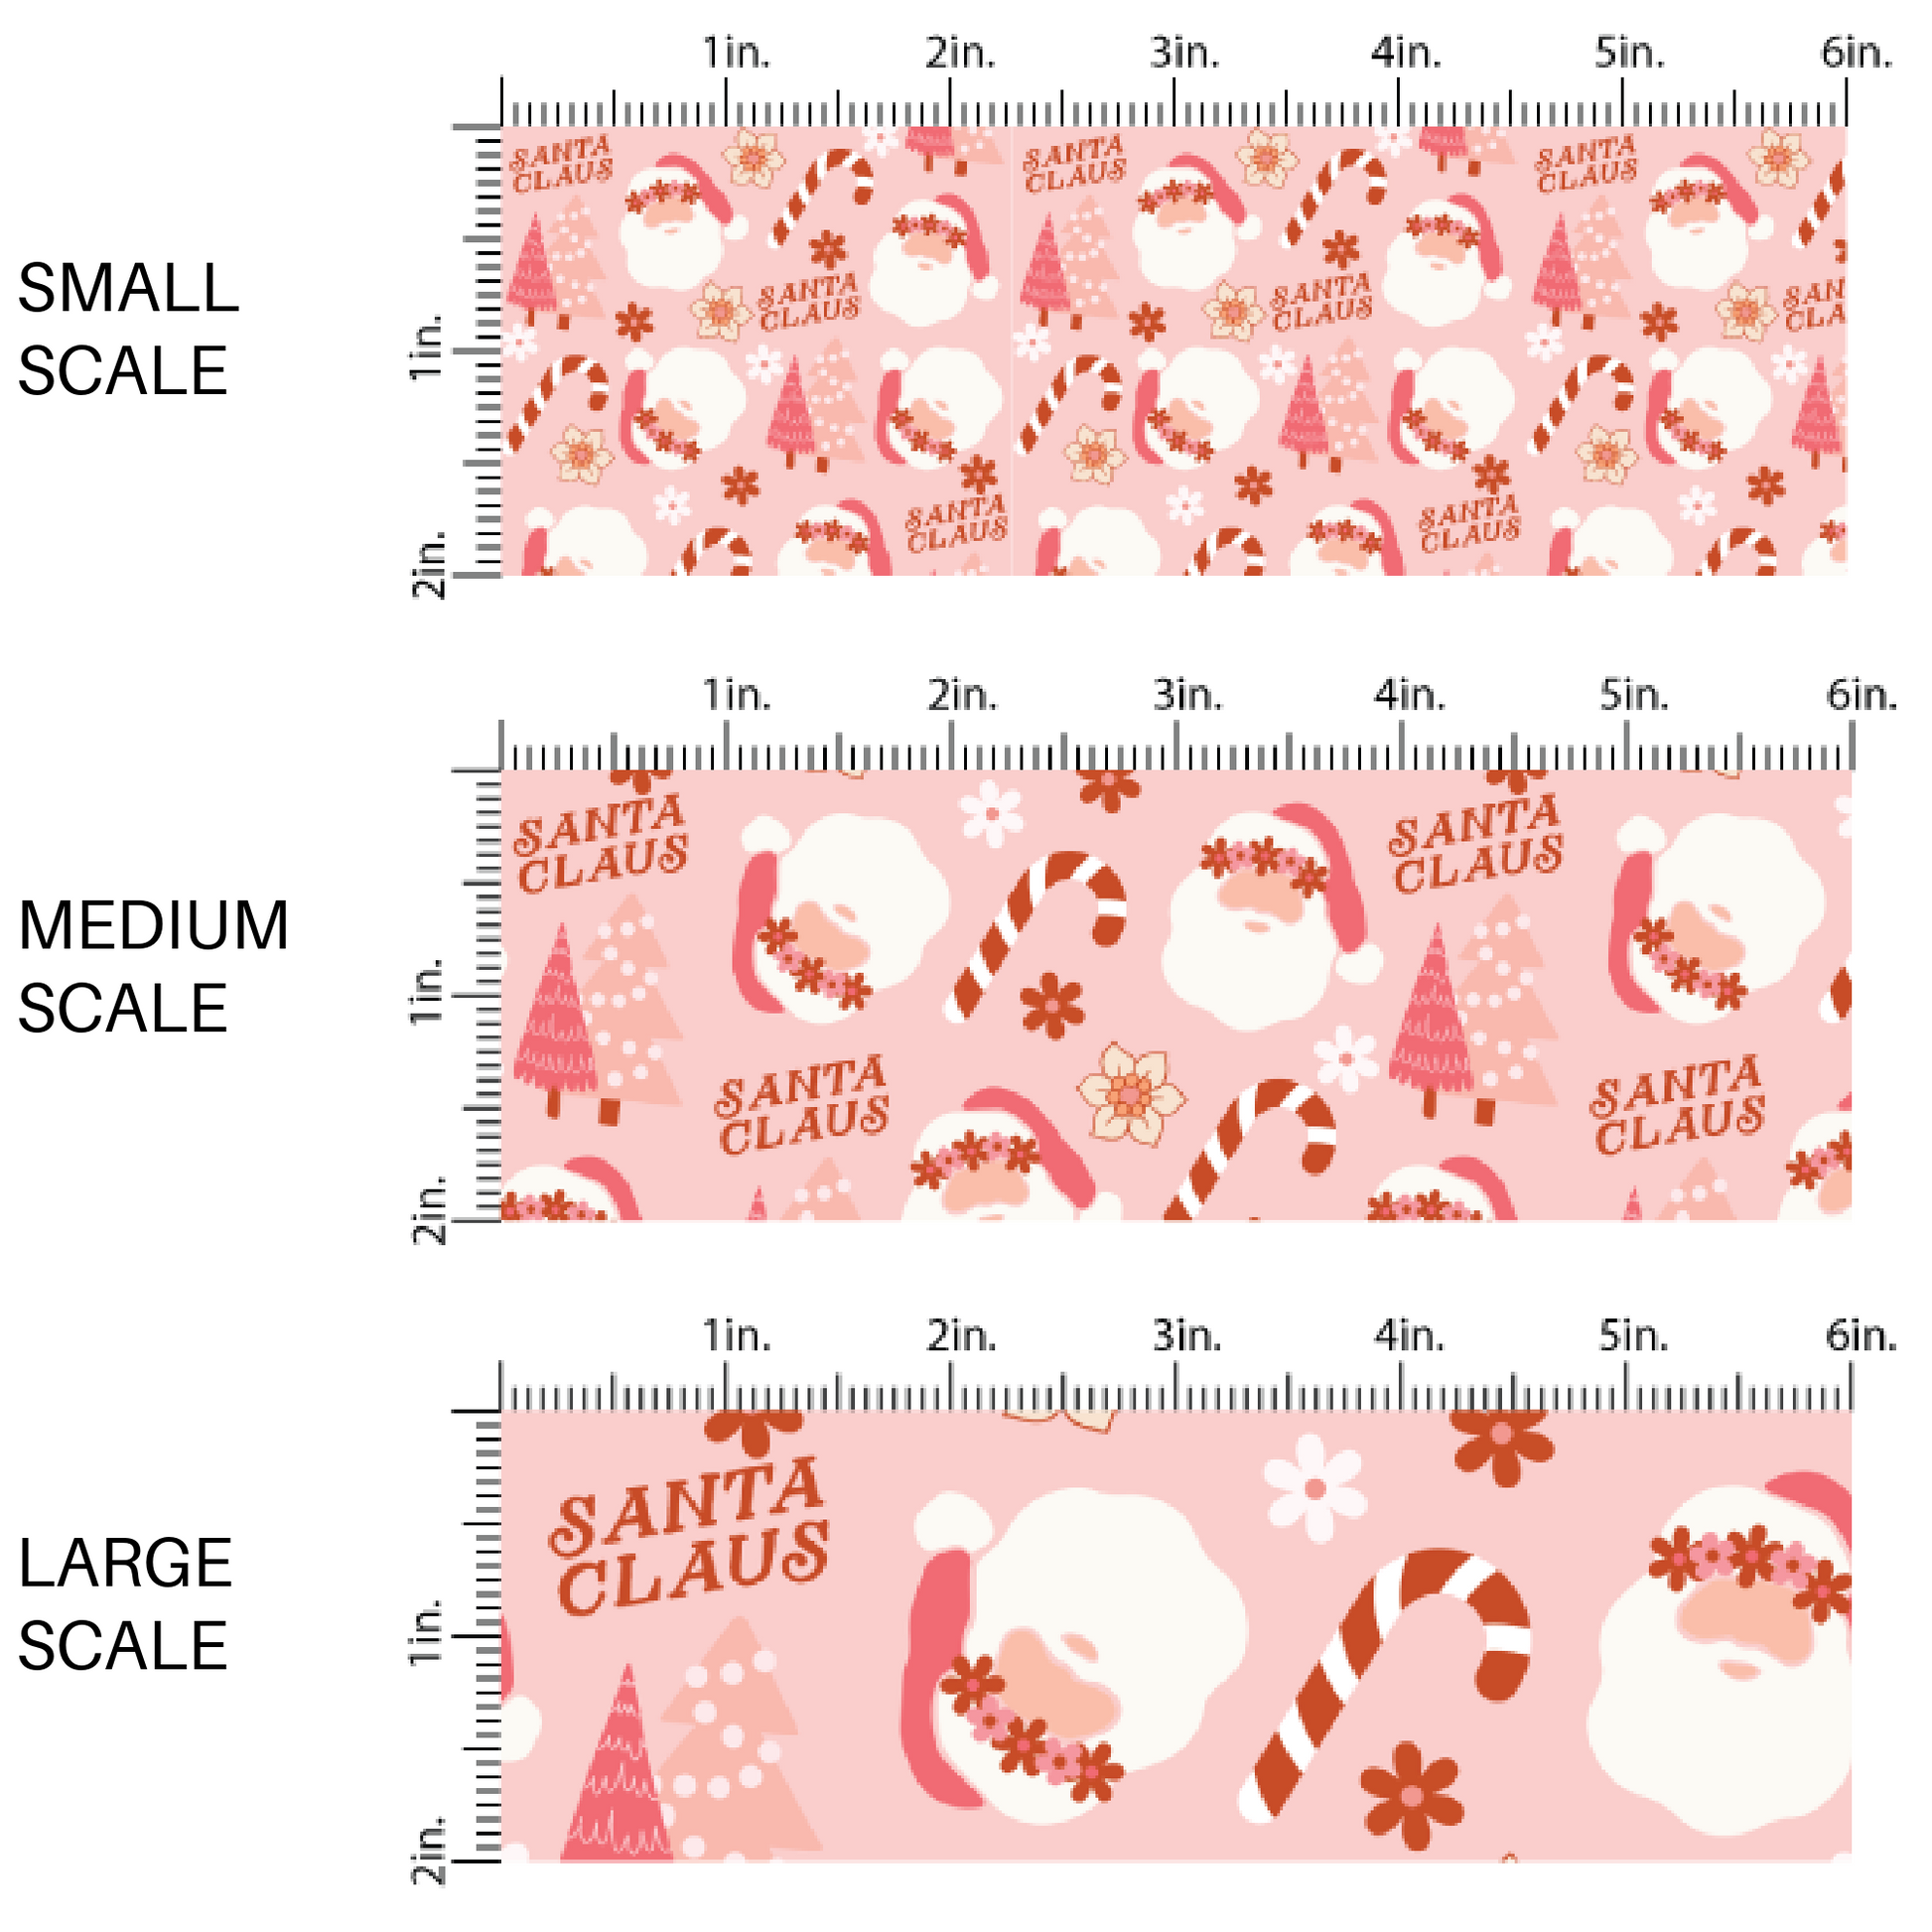 Pink Christmas pattern fabric adaptable for all your crafting needs. Make cute baby headwraps, fun girl hairbows, knotted headbands for adults or kids, clothing, and more!